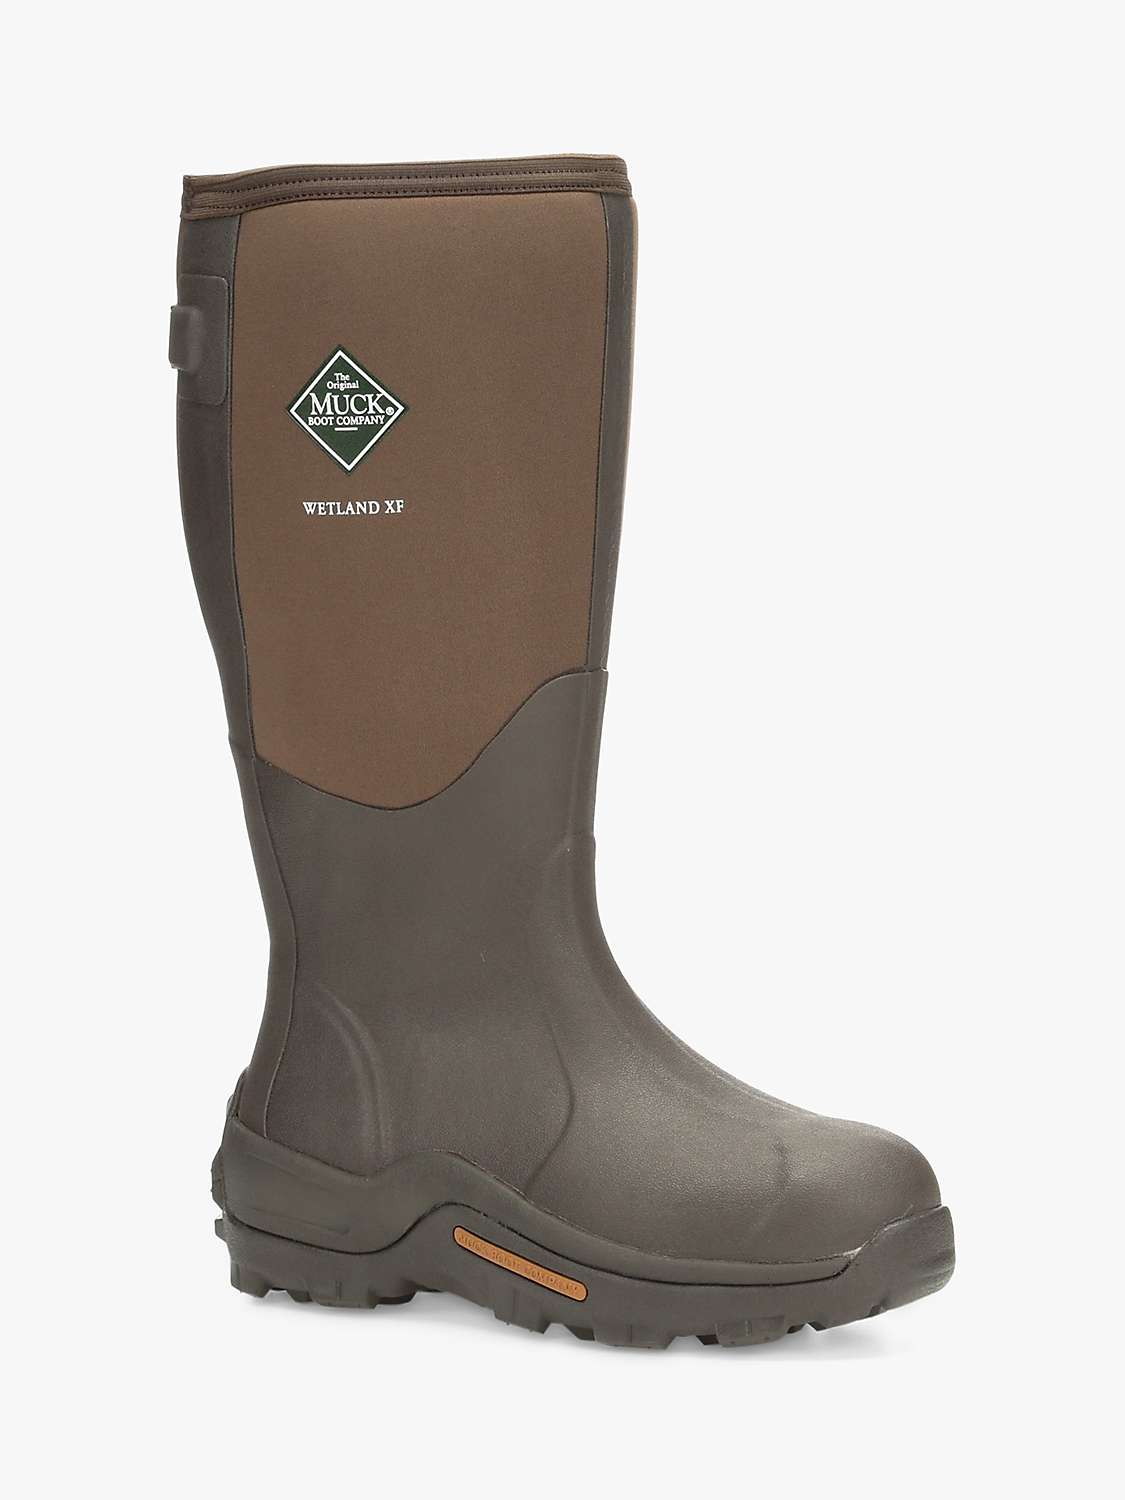 Buy Muck Wetland XF Tall Wellington Boots, Brown Online at johnlewis.com